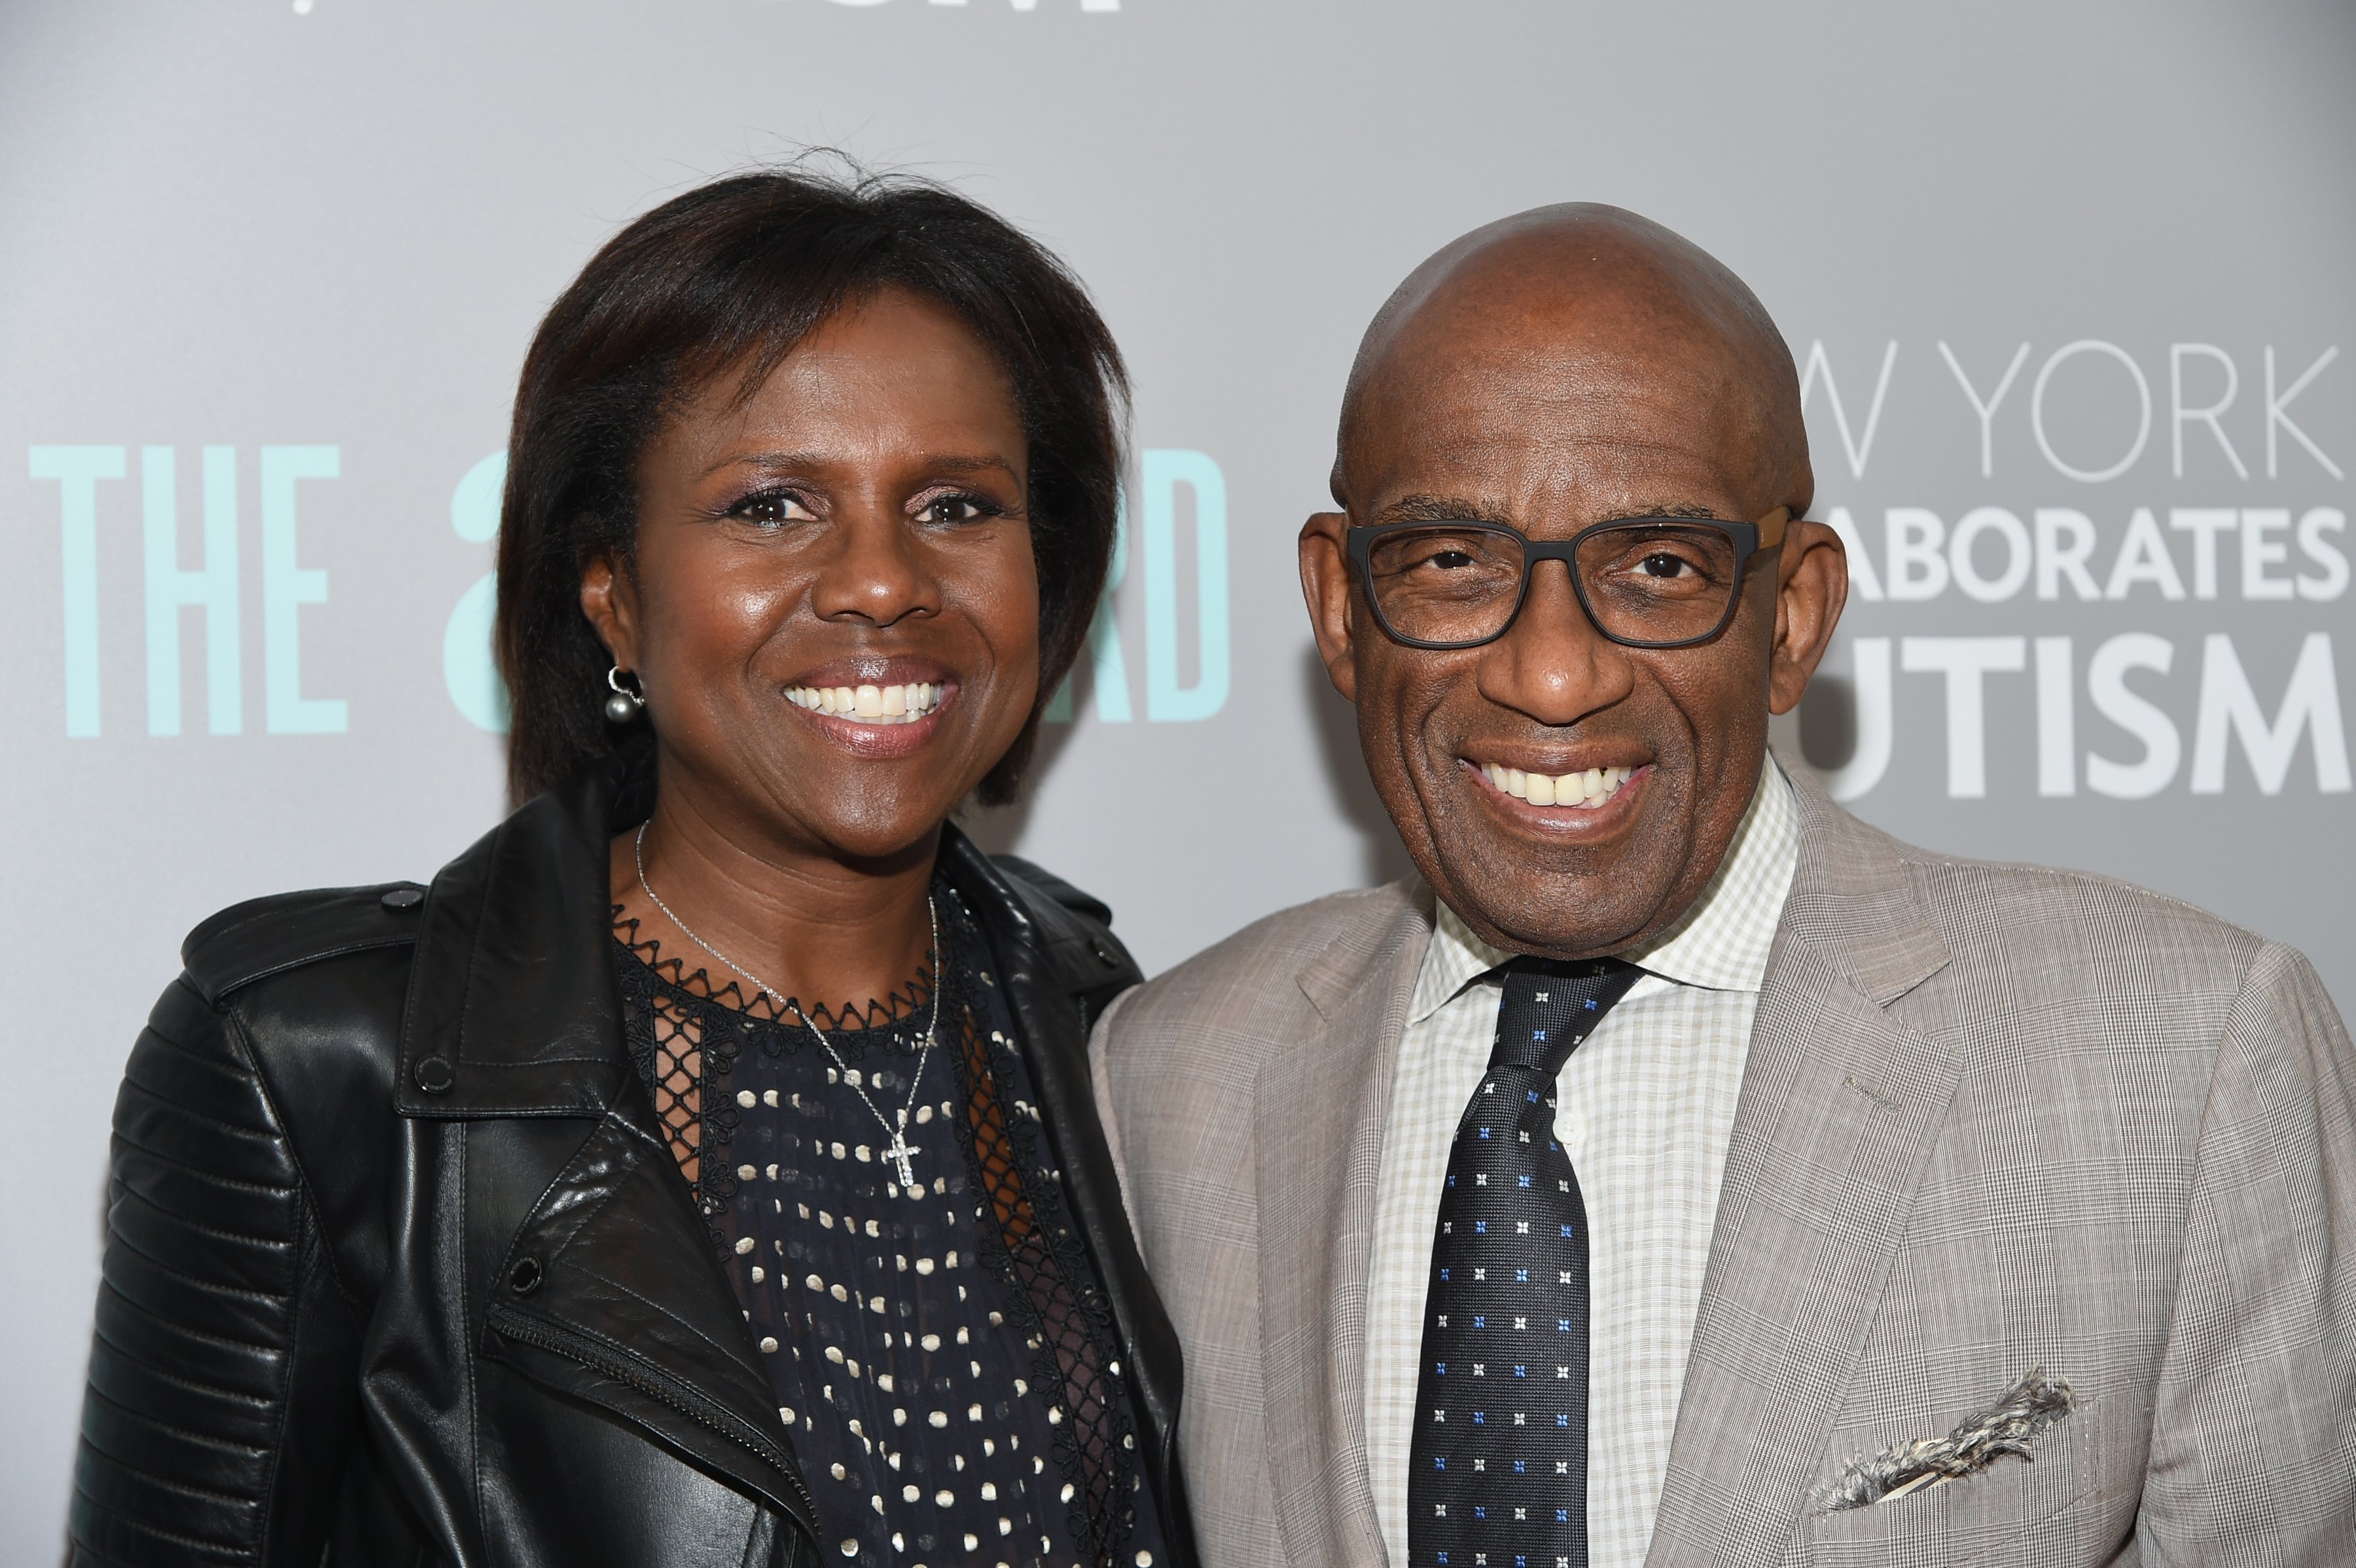 Al Roker (R) and wife Deborah Roberts attend the "The A Word" New York screening at Museum Of Arts And Design on June 28, 2016, in New York City. | Source: Getty Images.